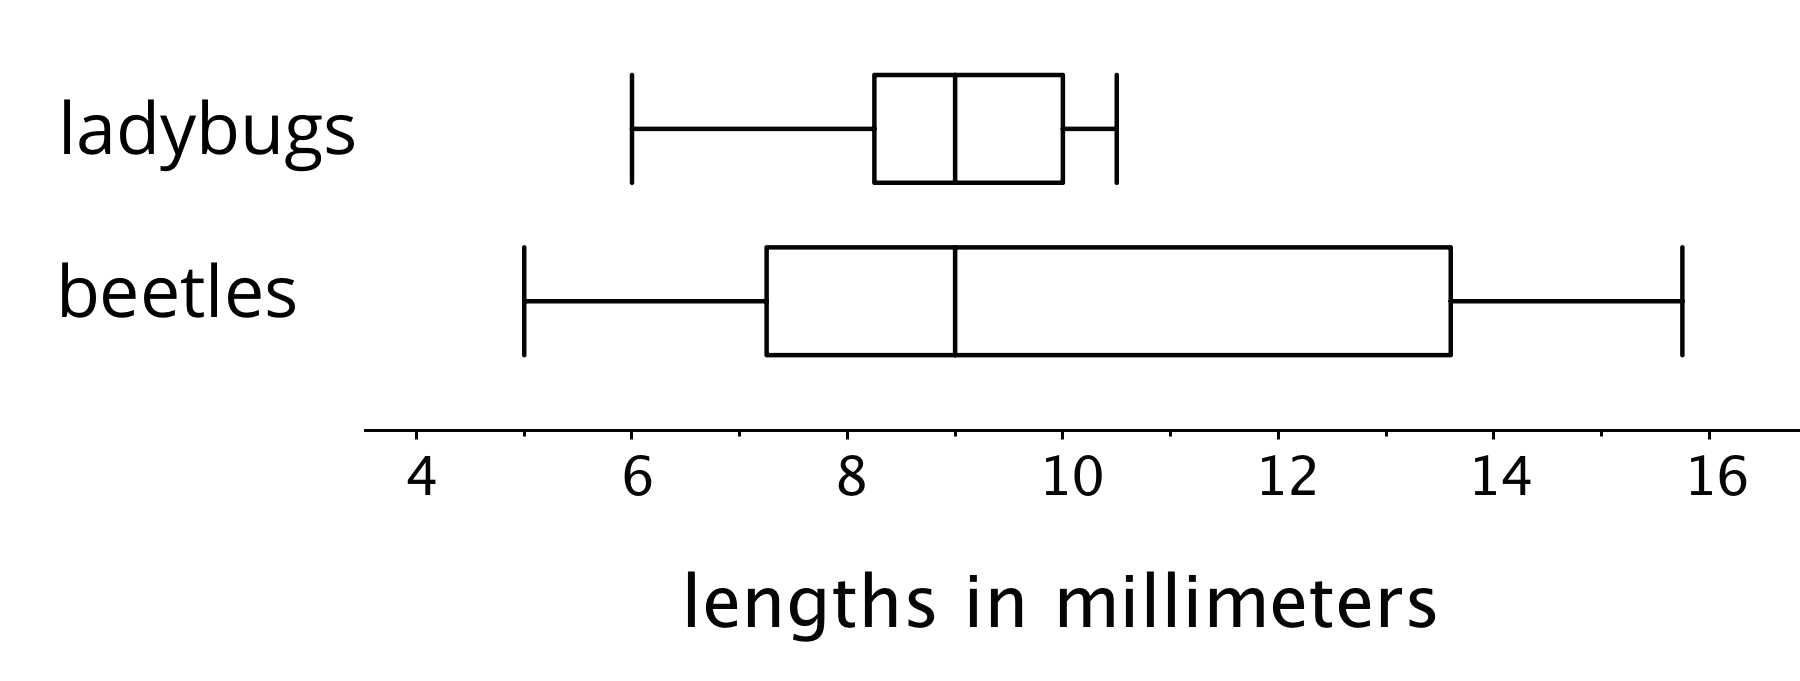 Two sets of box plots for "lengths in millimeters". The numbers 4 through 16 are indicated in increments of 2. There are tick marks midway between the indicated numbers. The top box plot is for "ladybugs".  The five-number summary is as follows: Minimum value, 6. Maximum value, 10.5. Q1, 8.5. Q2, 9. Q3, 10. The bottom box plot is for "beetles".  The five-number summary is as follows: Minimum value, 5. Maximum value, 15.5. Q1, 7.5. Q2, 9. Q3, 13.5.